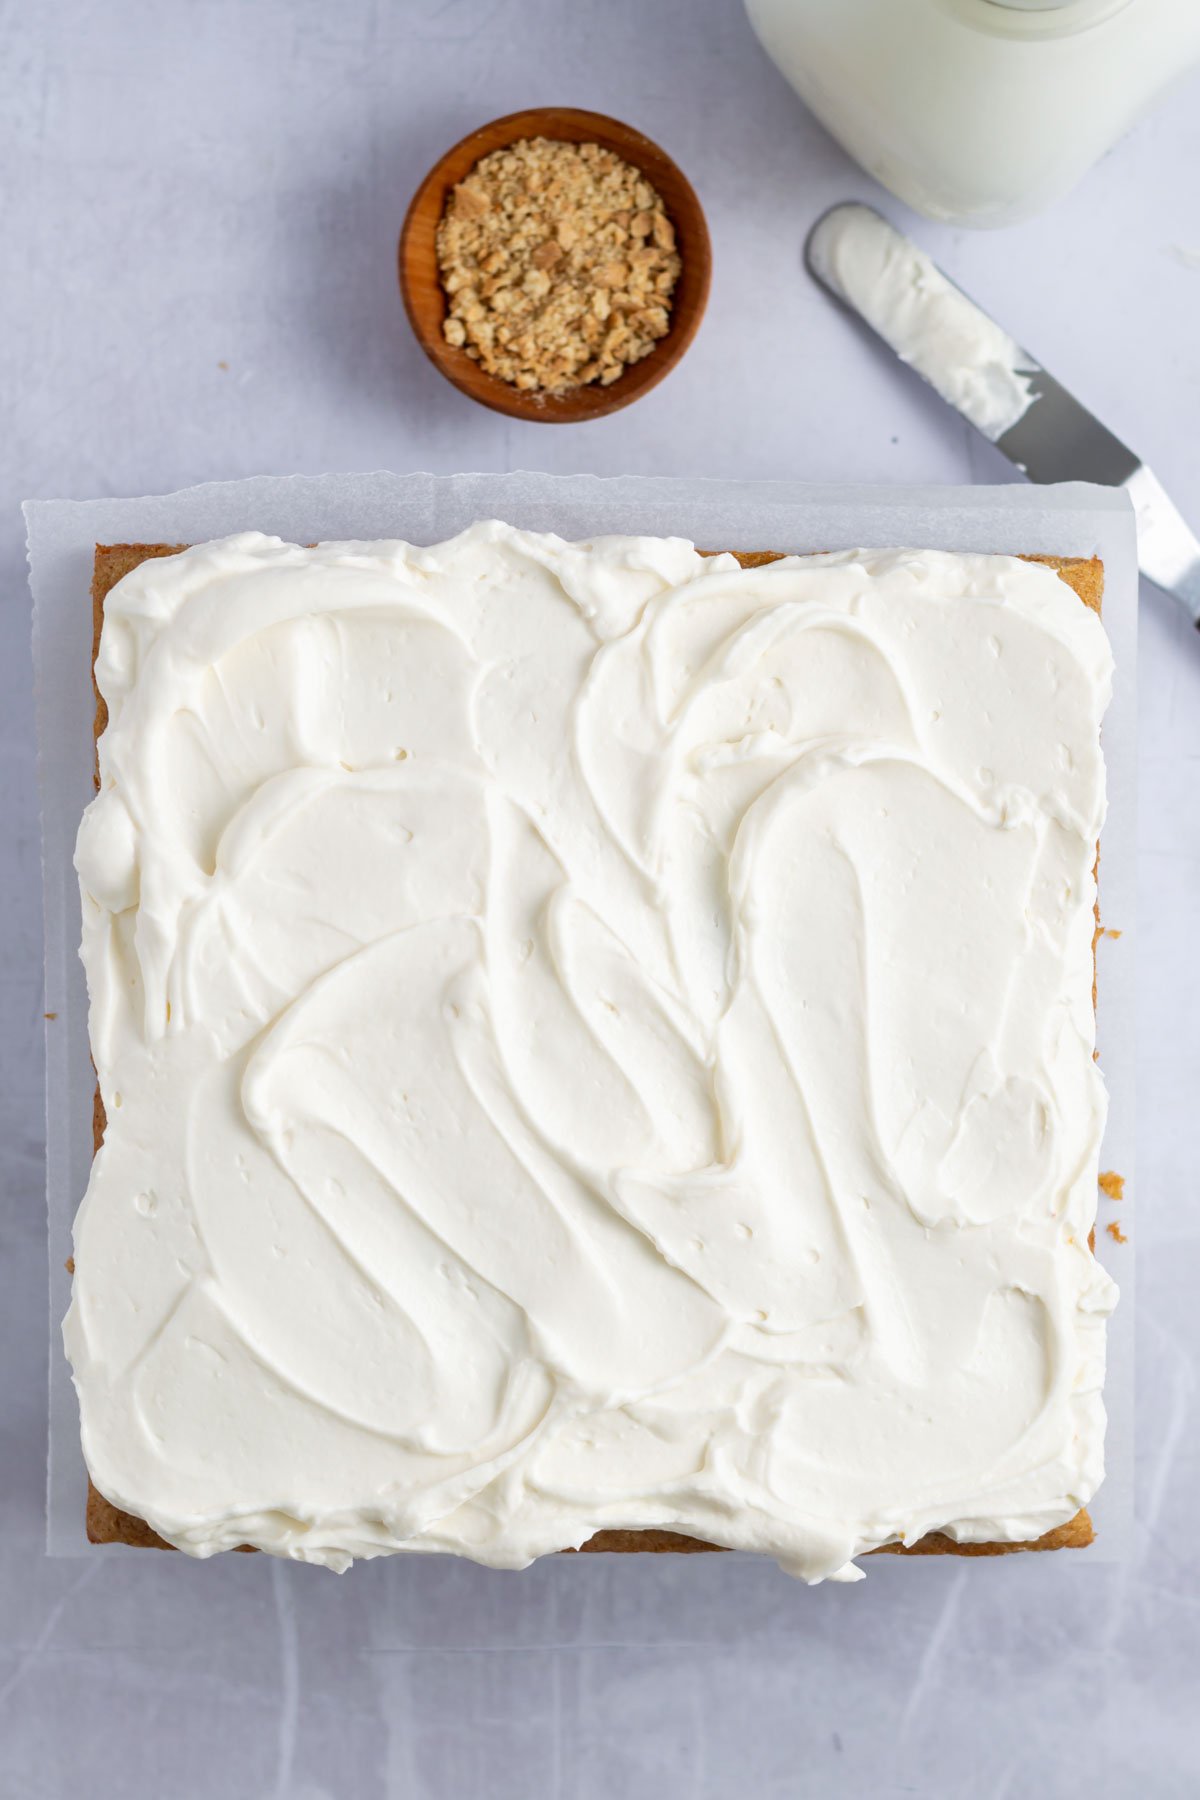 frosting topping swirled on top of cake with a bowl of graham cracker crumbs